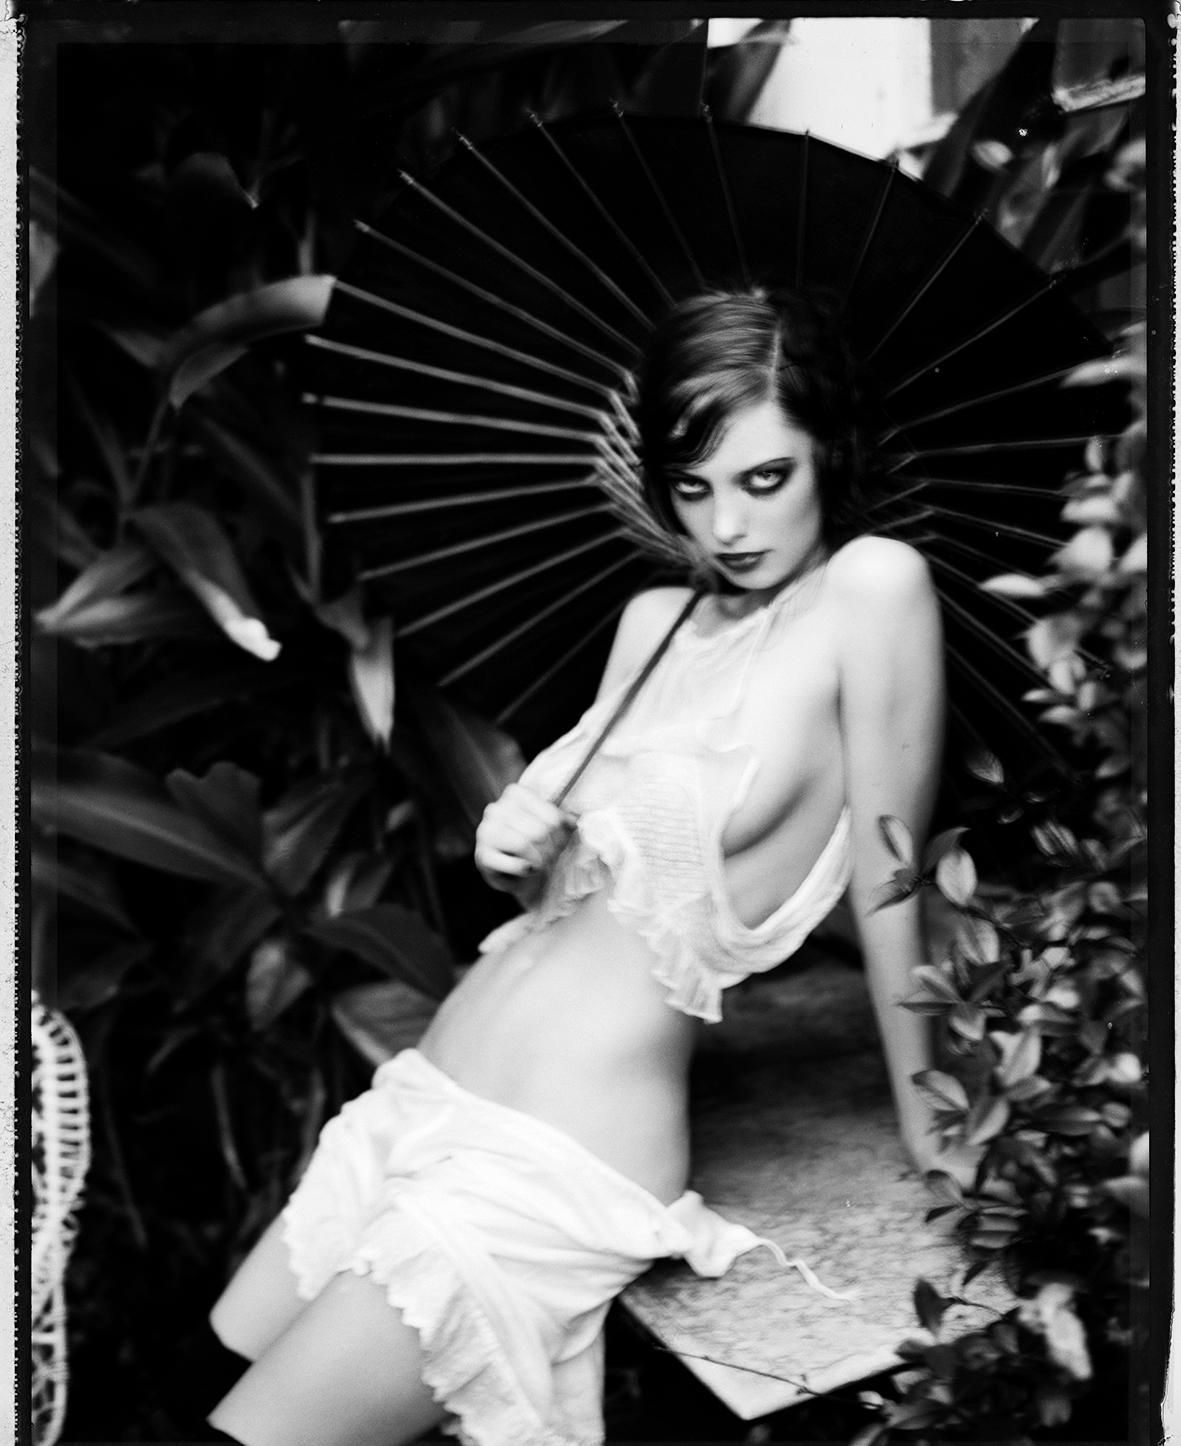 Rainy Day, Celebrity, black and white photography, nude